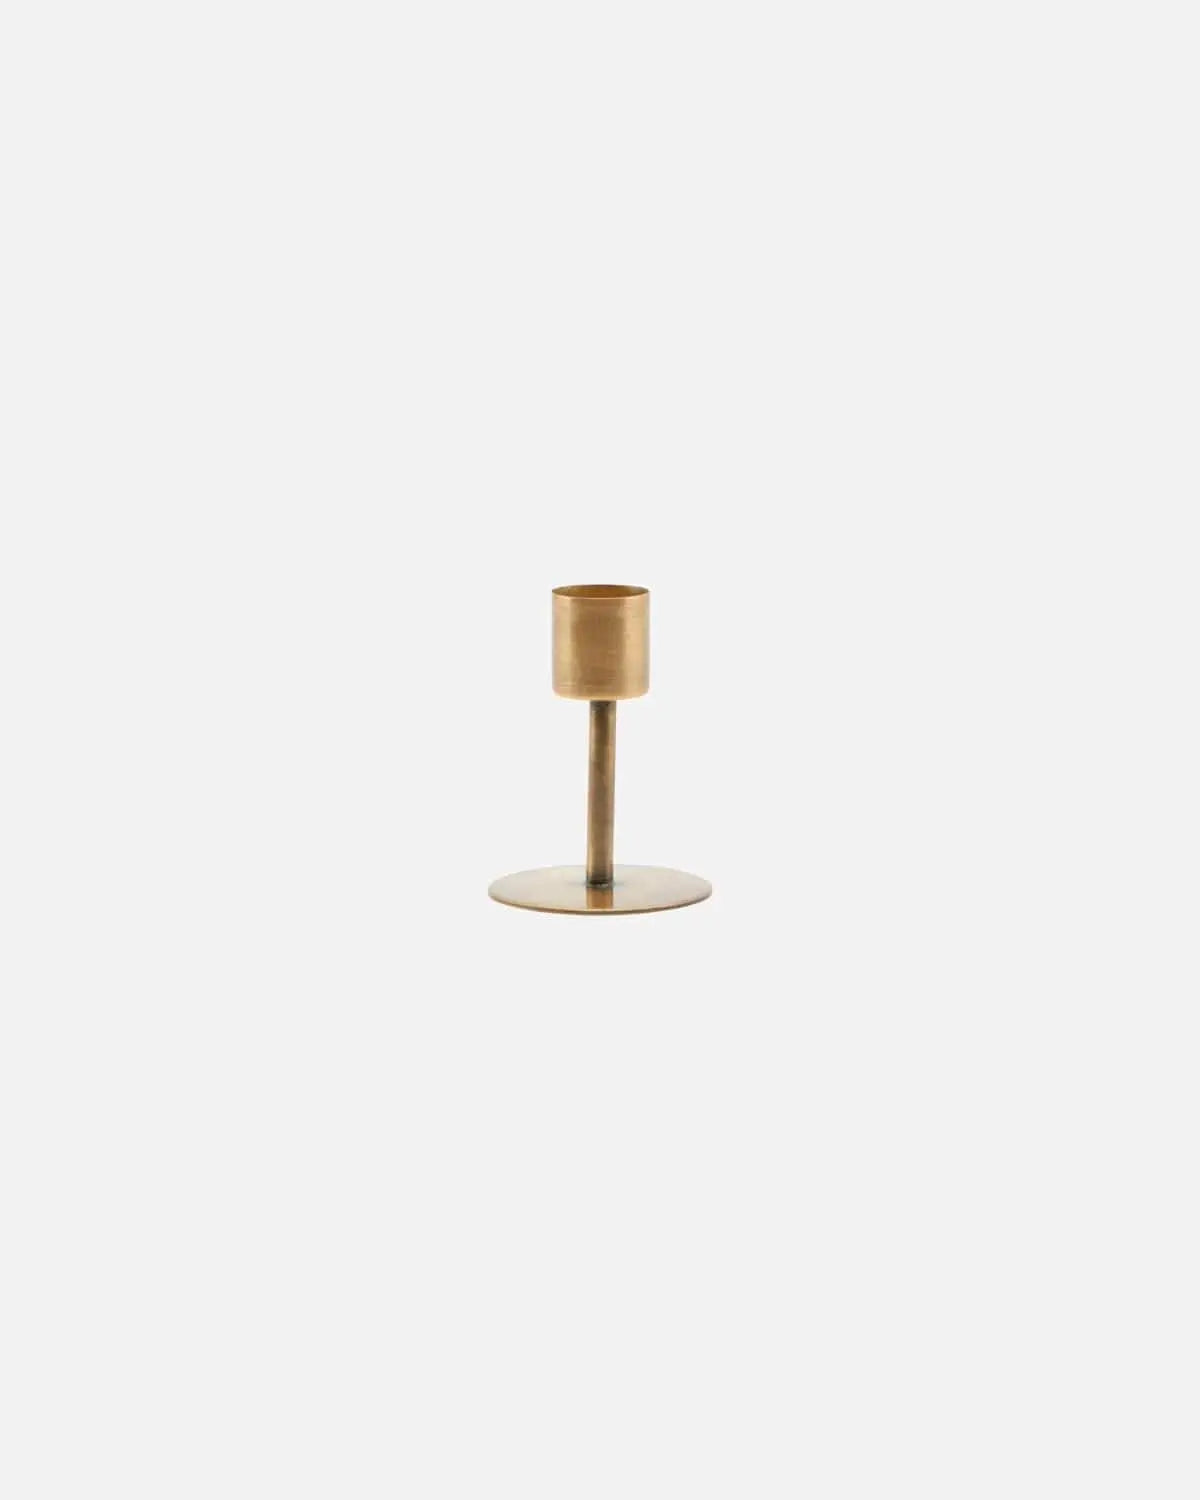 Candle Holders Anit, Antique brass Candle Holder - | Pop of Modern